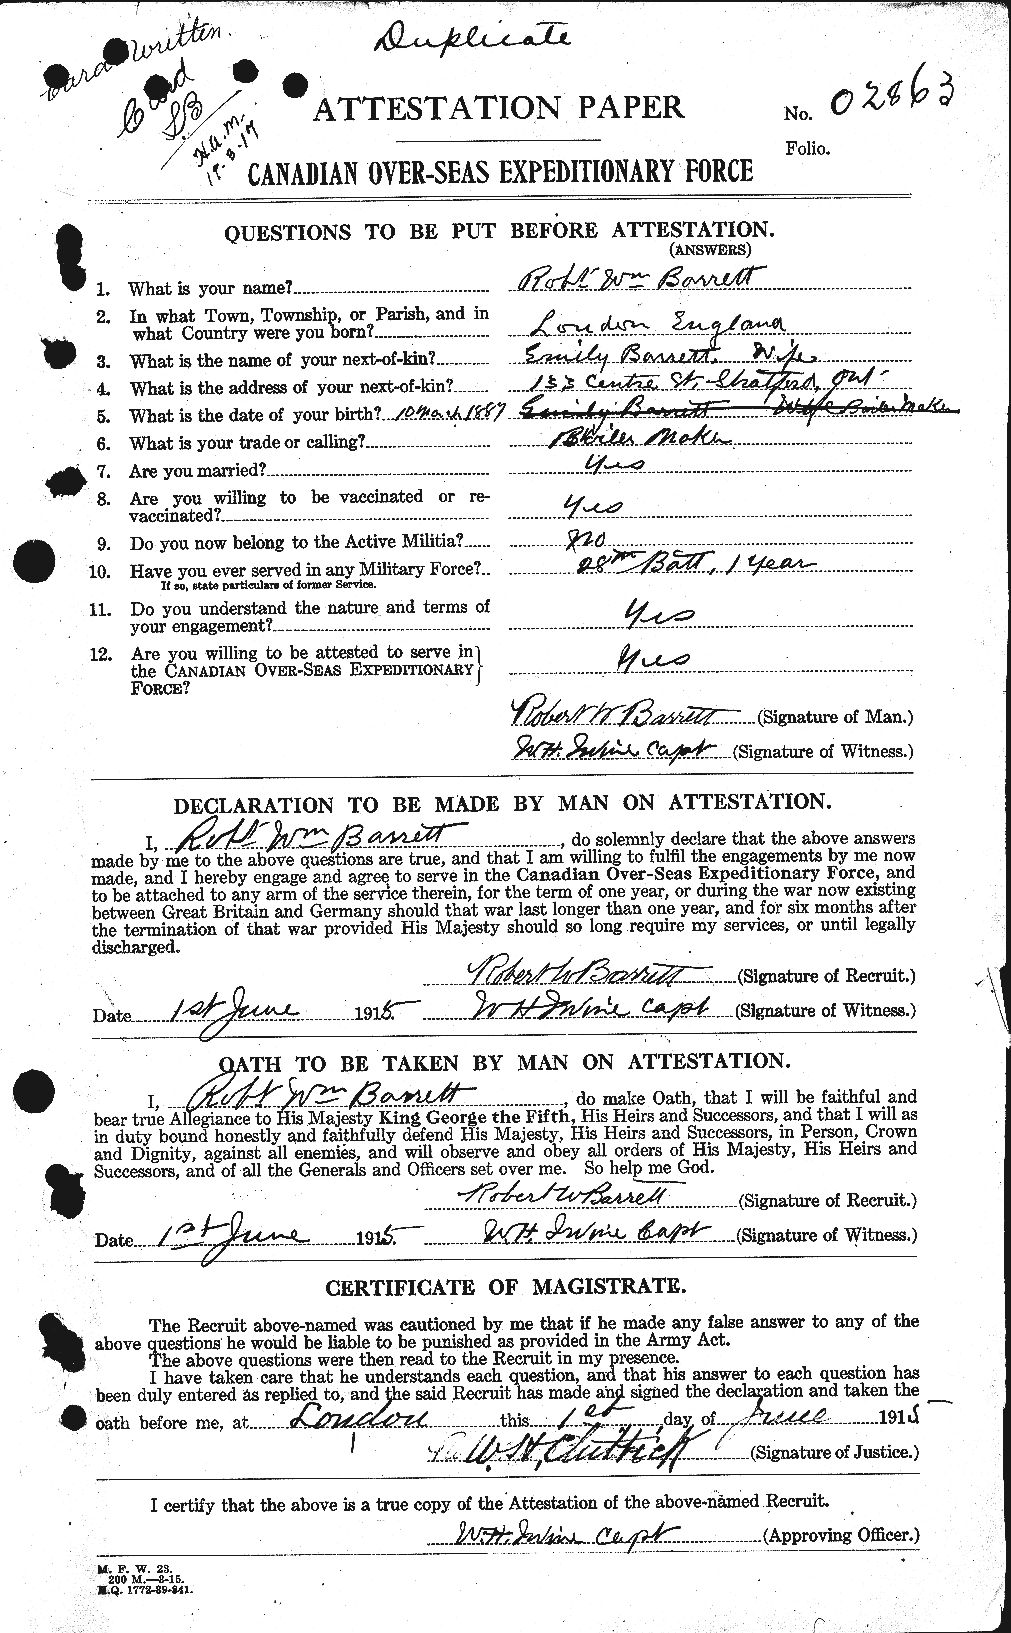 Personnel Records of the First World War - CEF 220189a